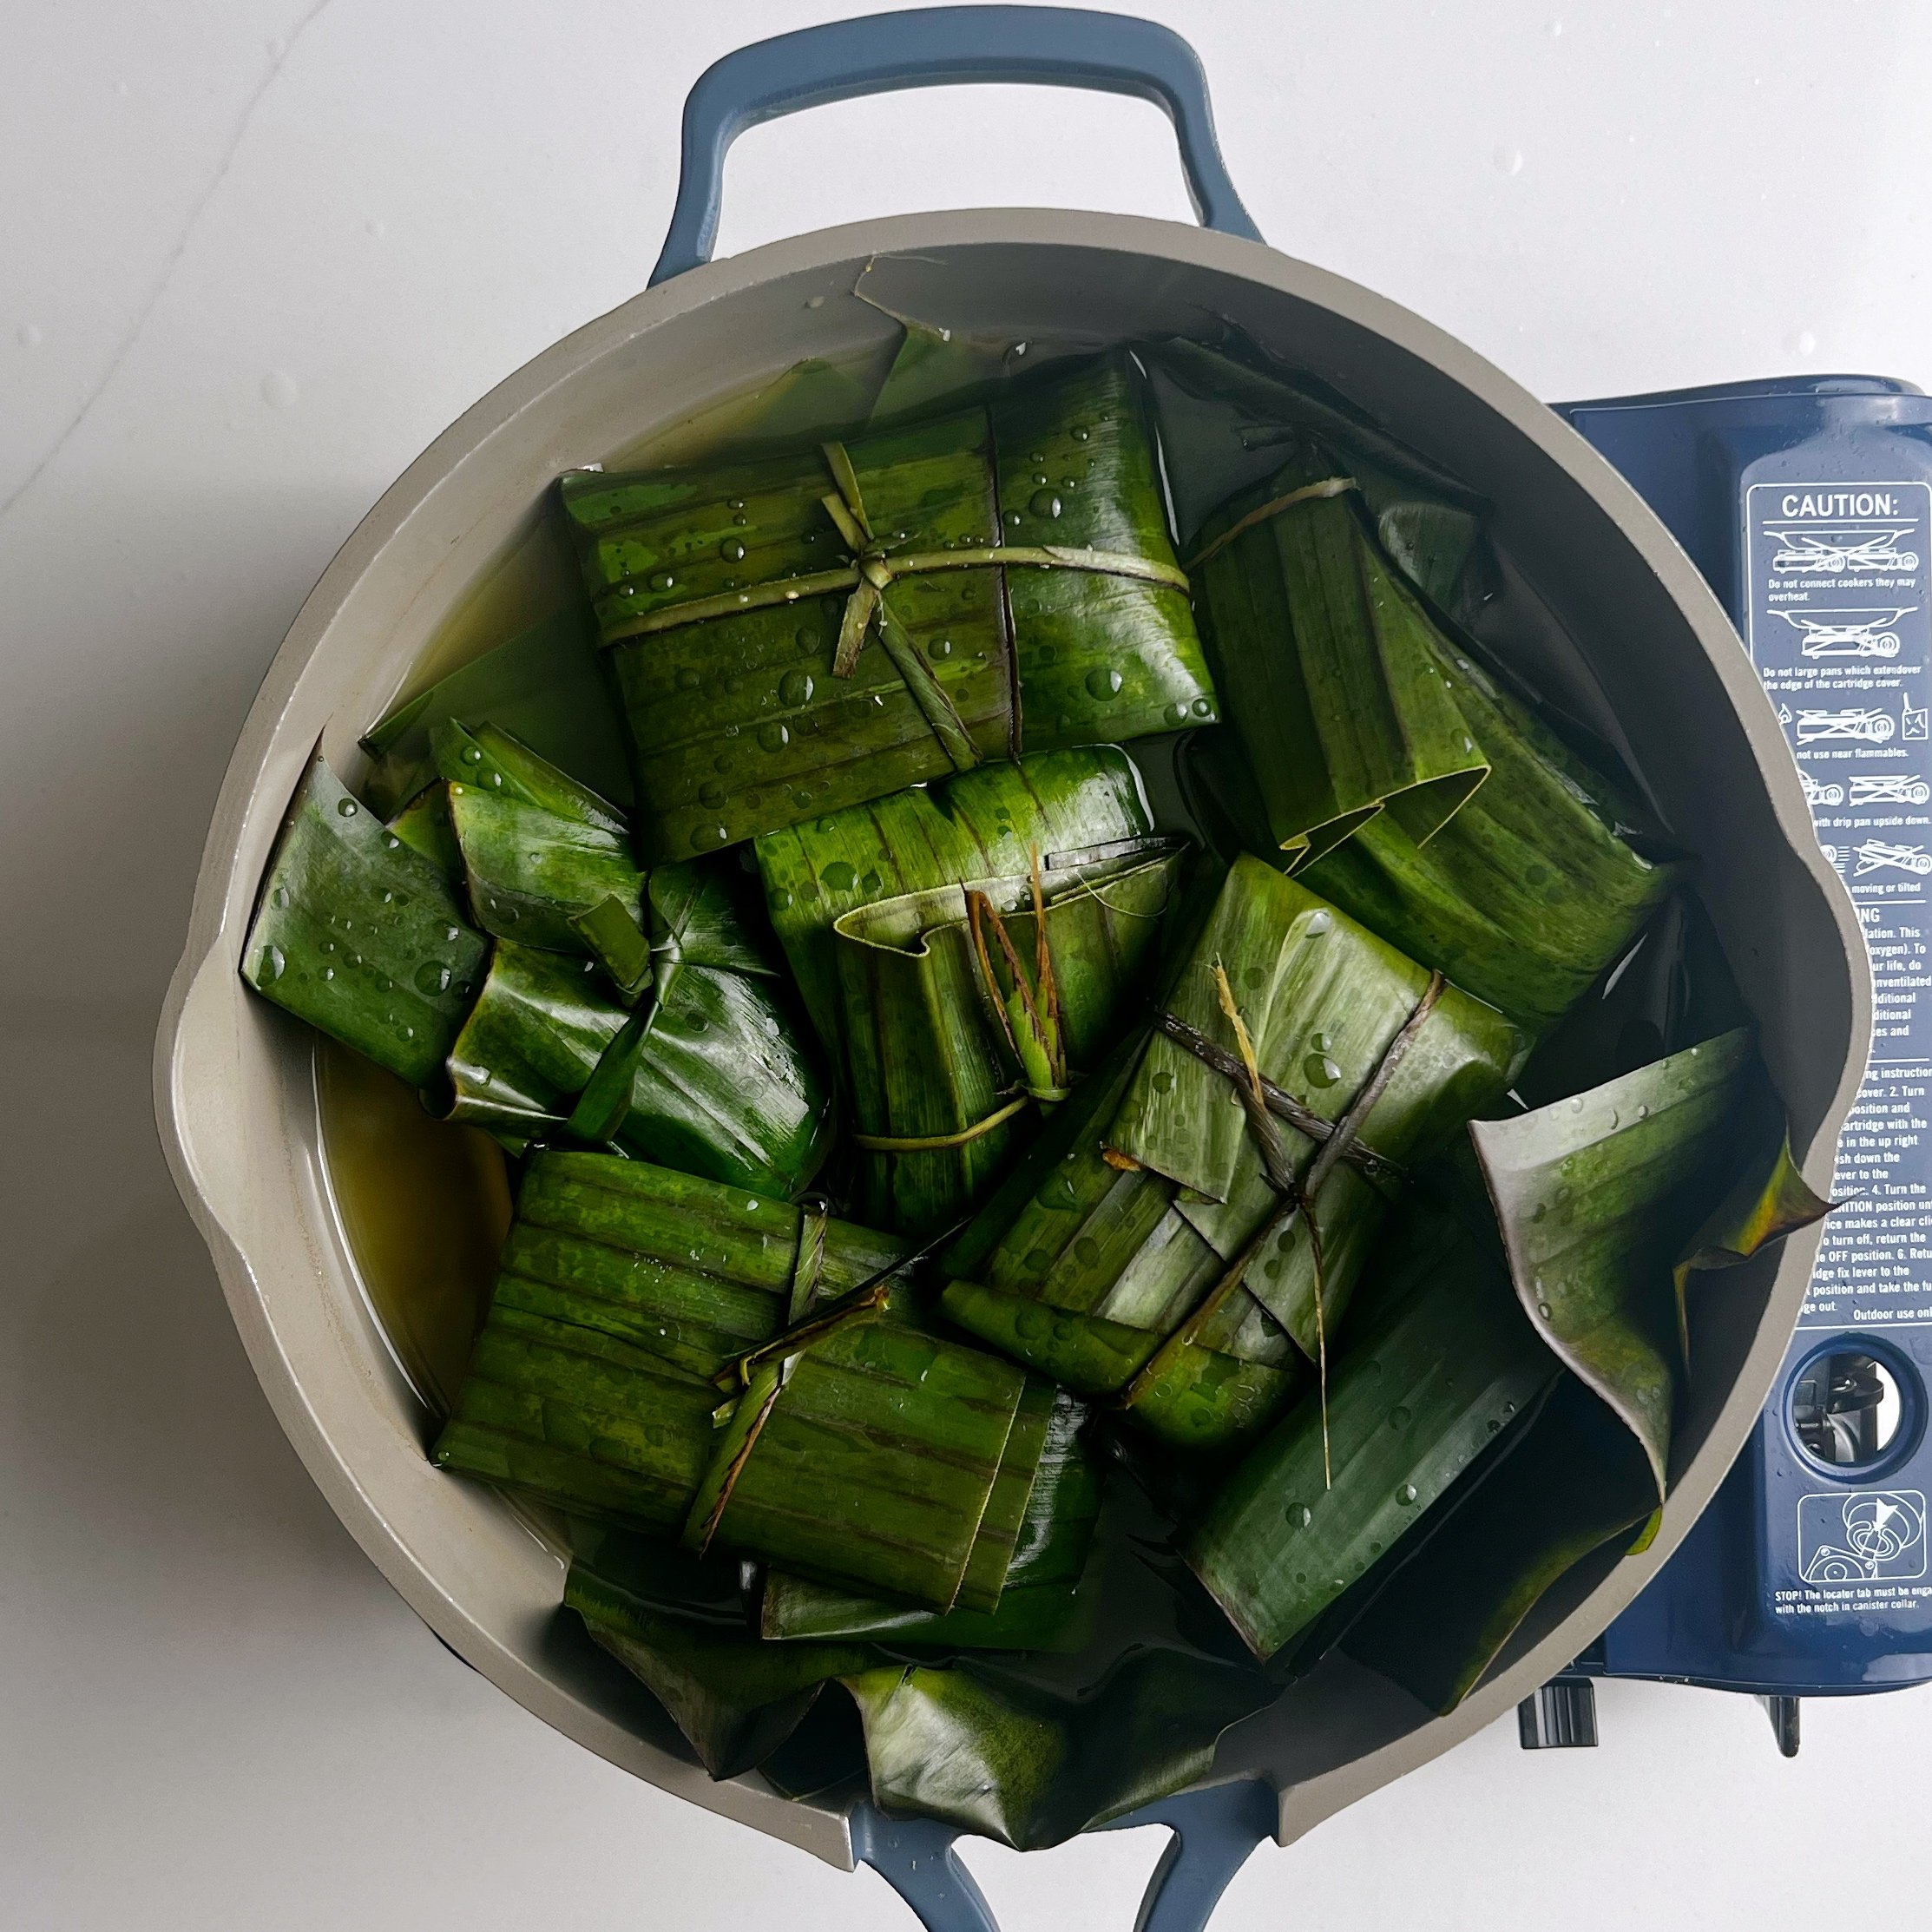 wrapped conkies on banana leaves in a pot of saucpan water